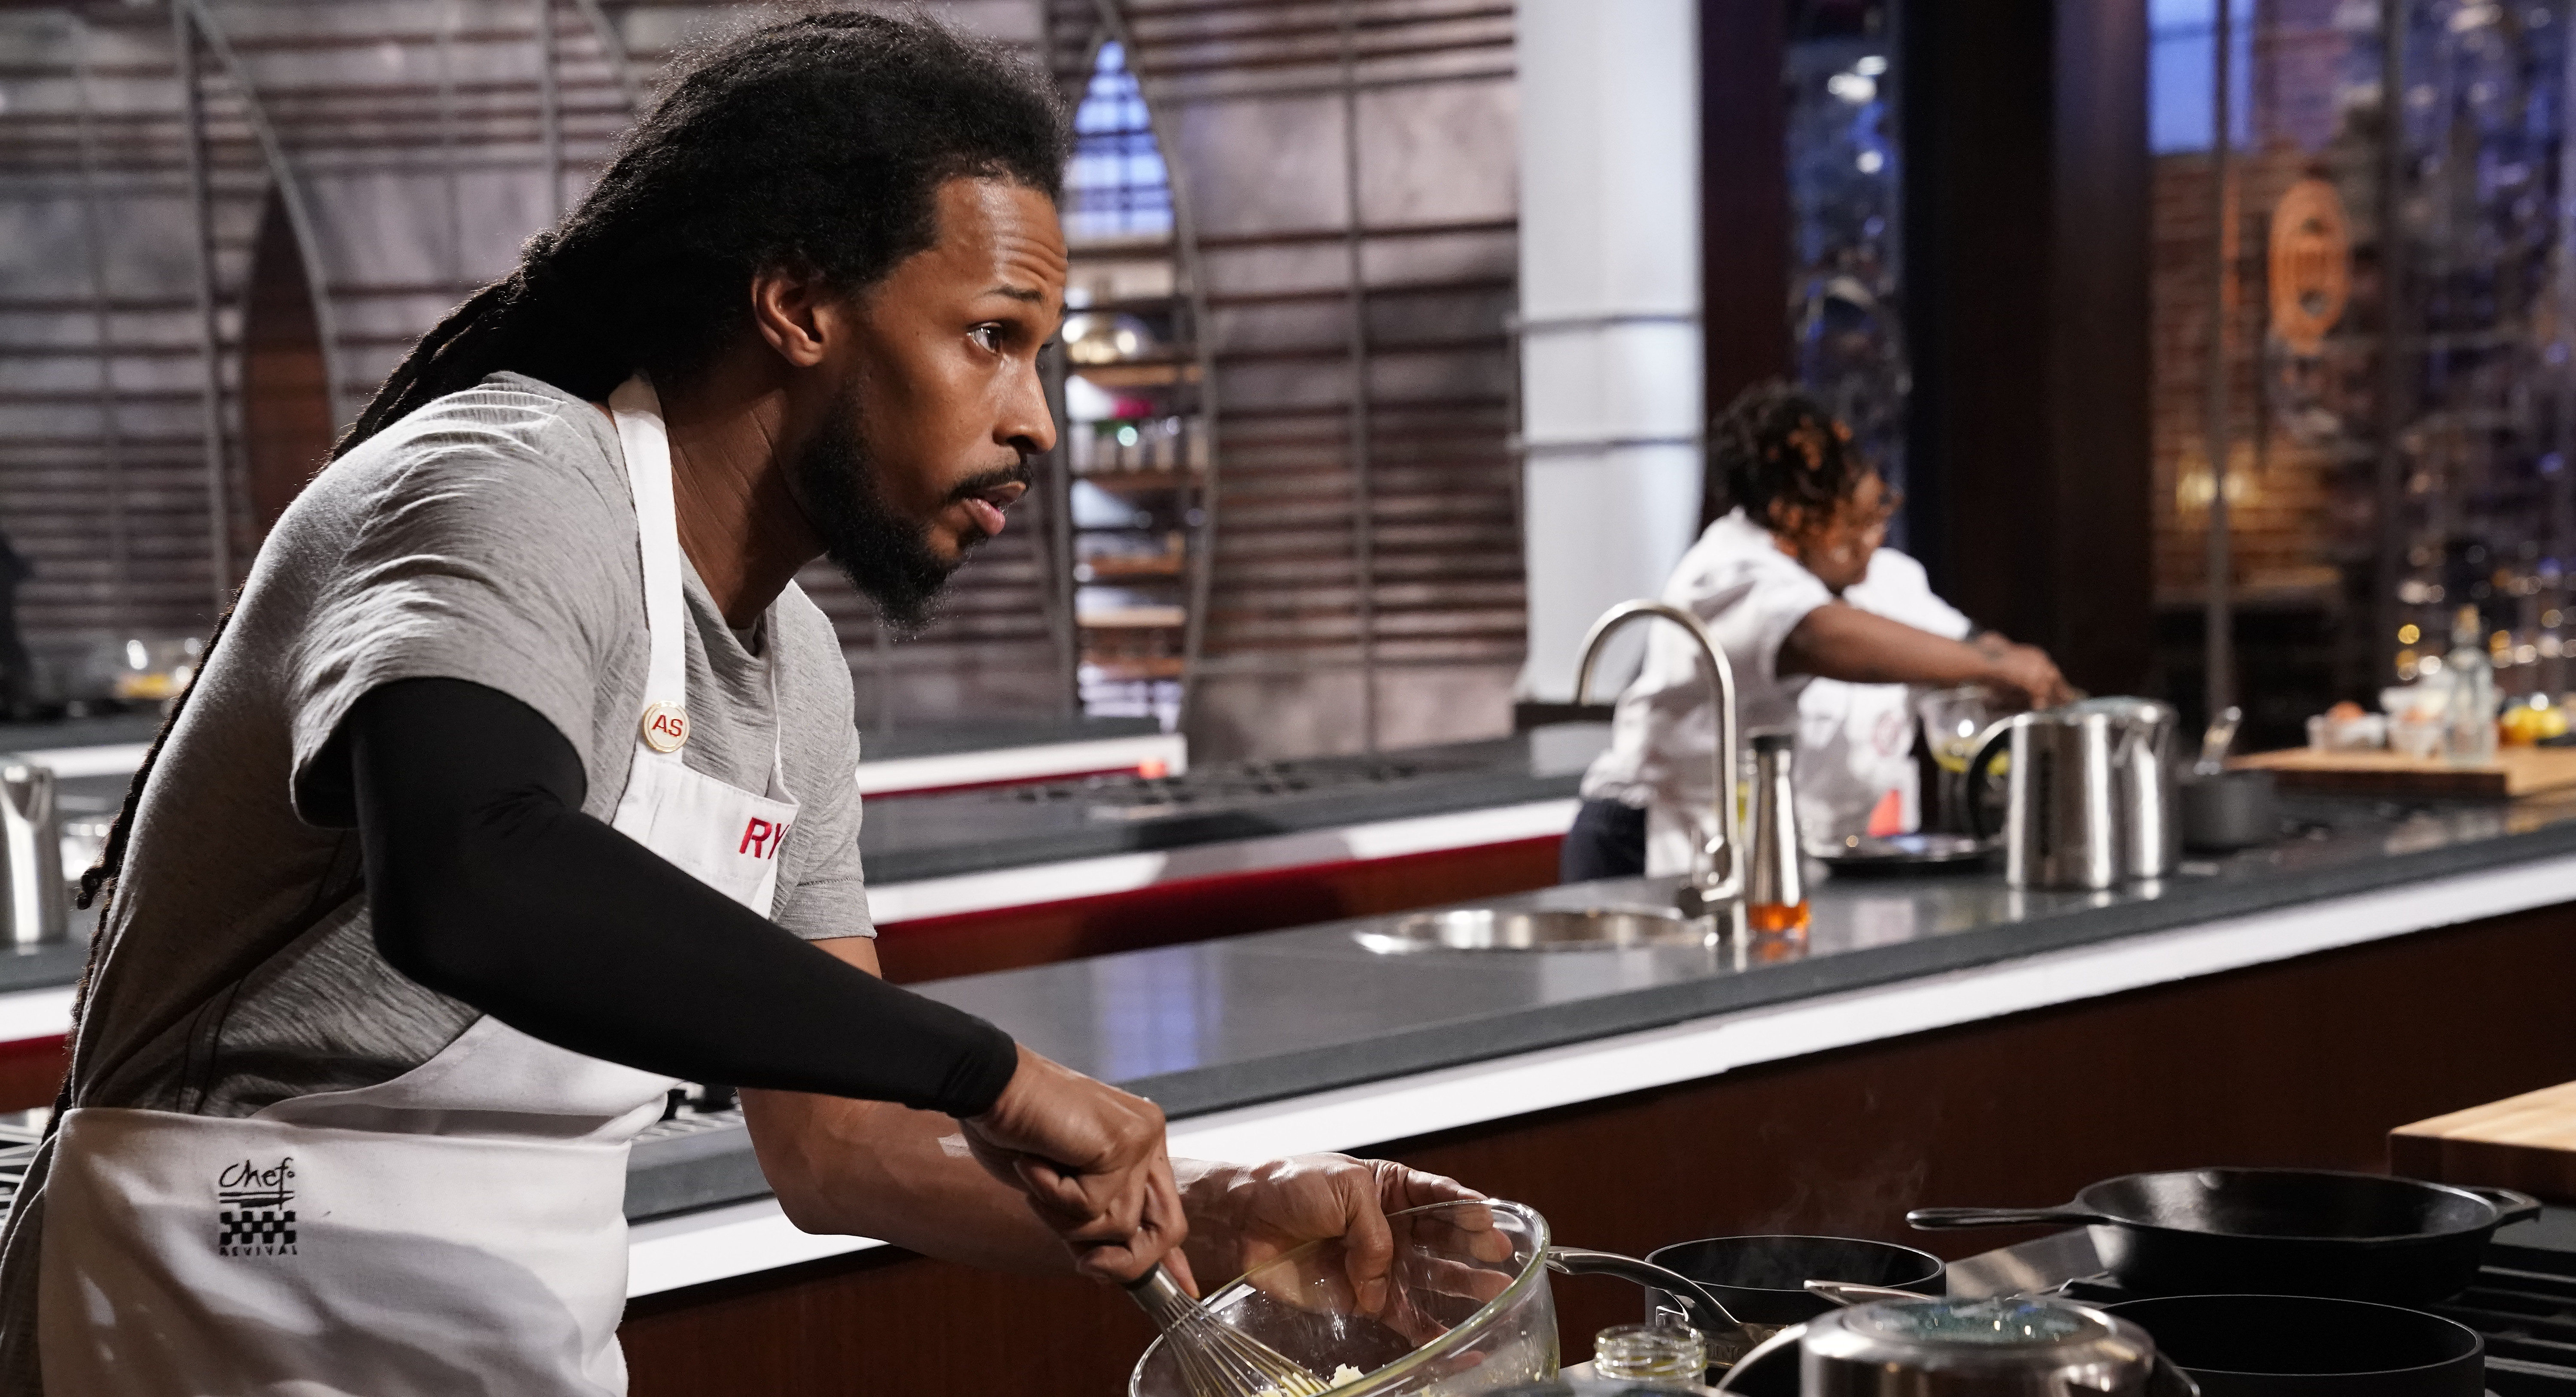 Road To Masterchef: How Hurricane Harvey and Questlove Lead Ryan To The Kitchen